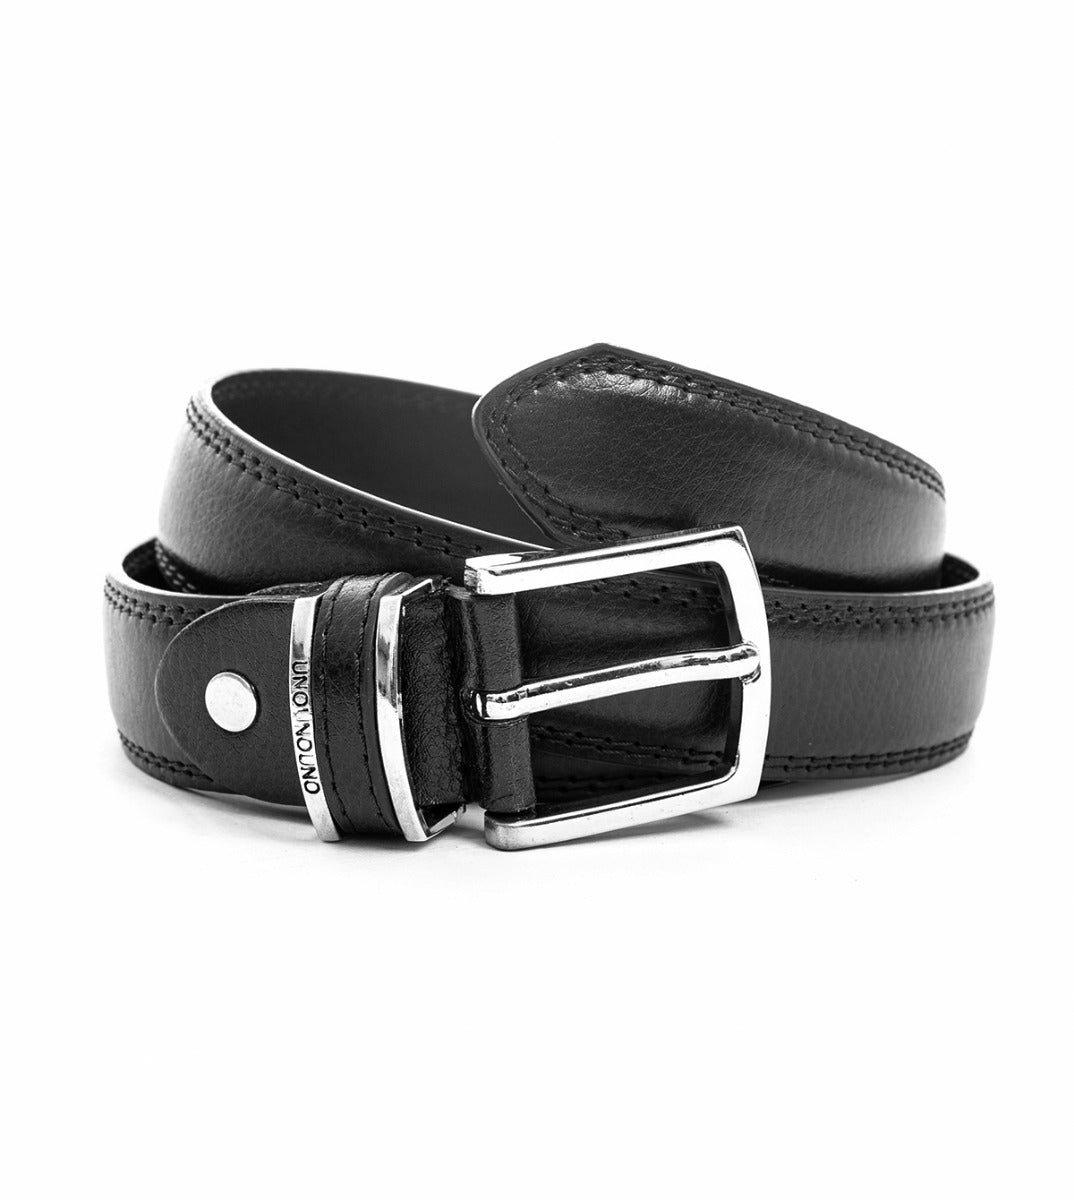 Wide Men's Belt Adjustable Metal Buckle Black Textured Faux Leather GIOSAL-A2082A